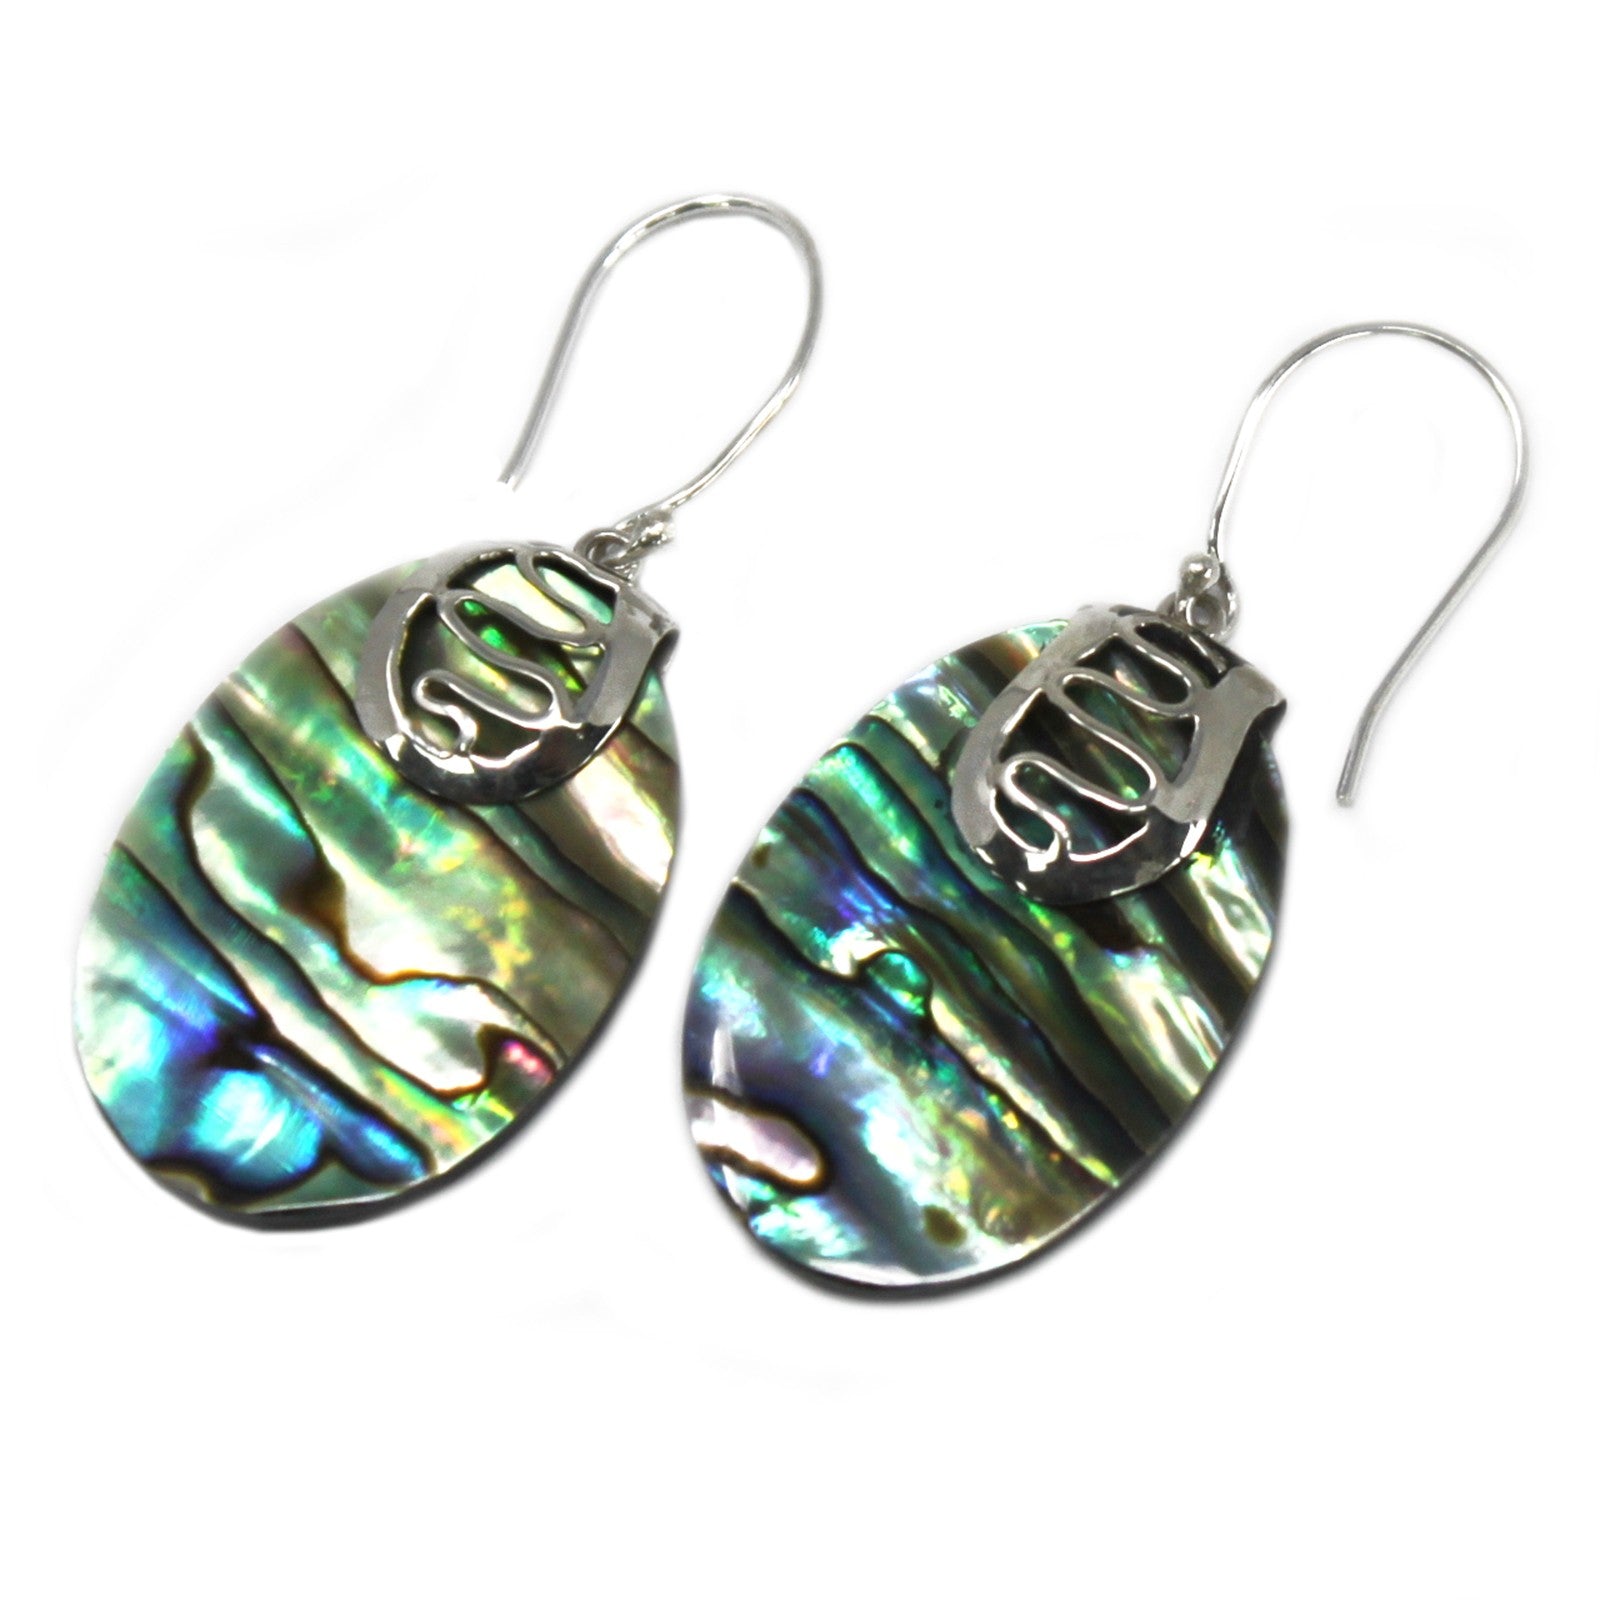 View Shell Silver Earrings Abalone information